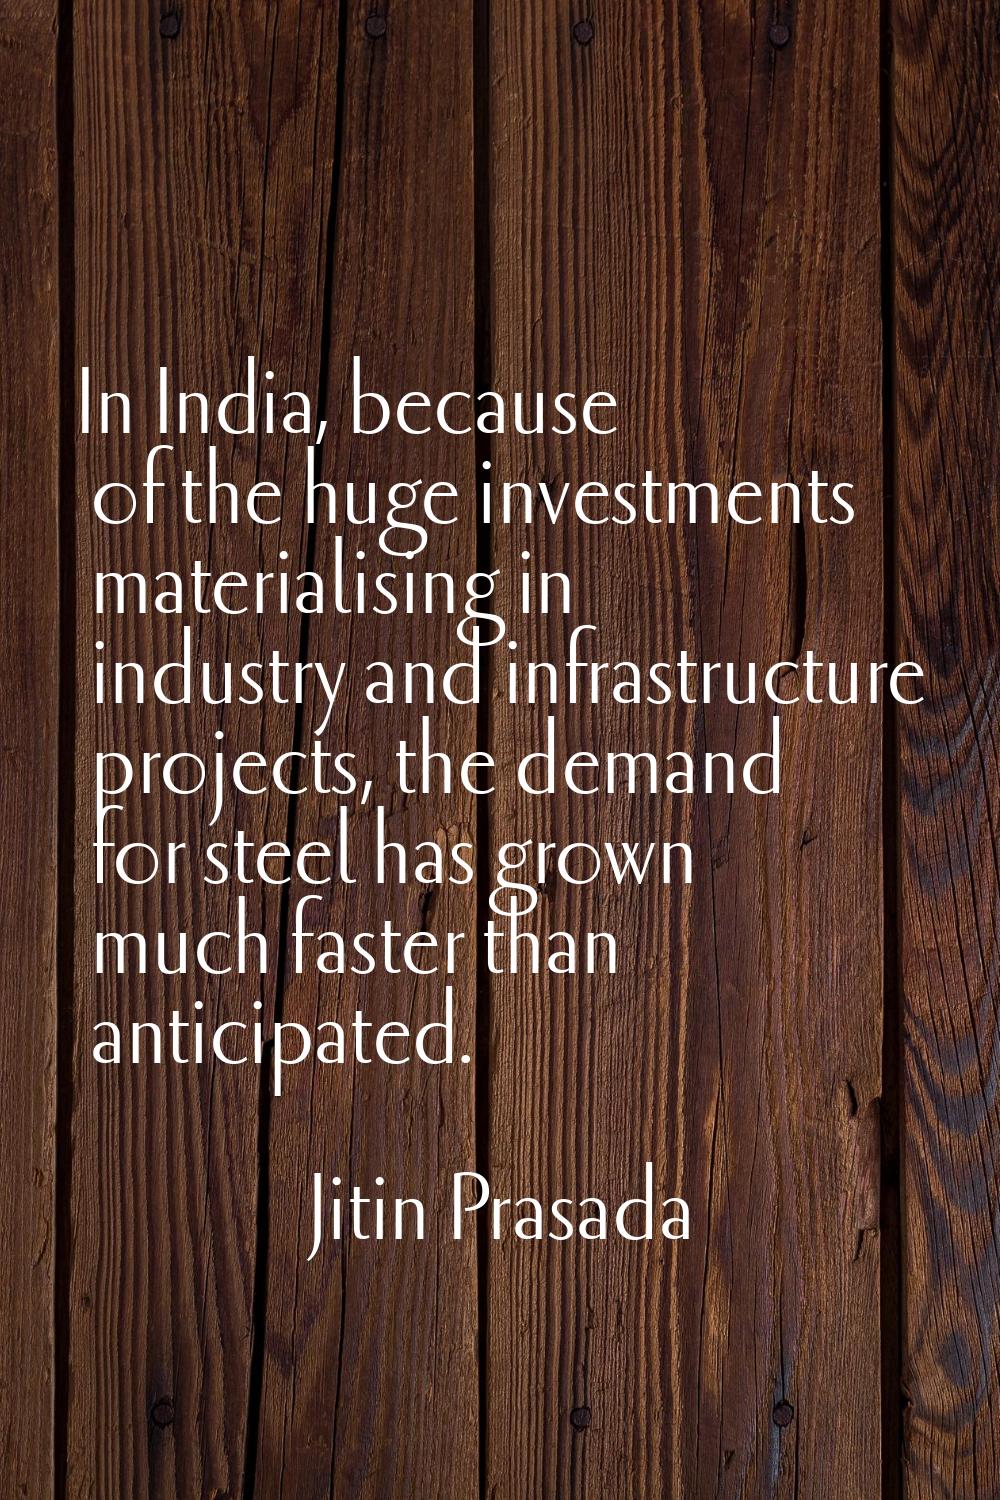 In India, because of the huge investments materialising in industry and infrastructure projects, th